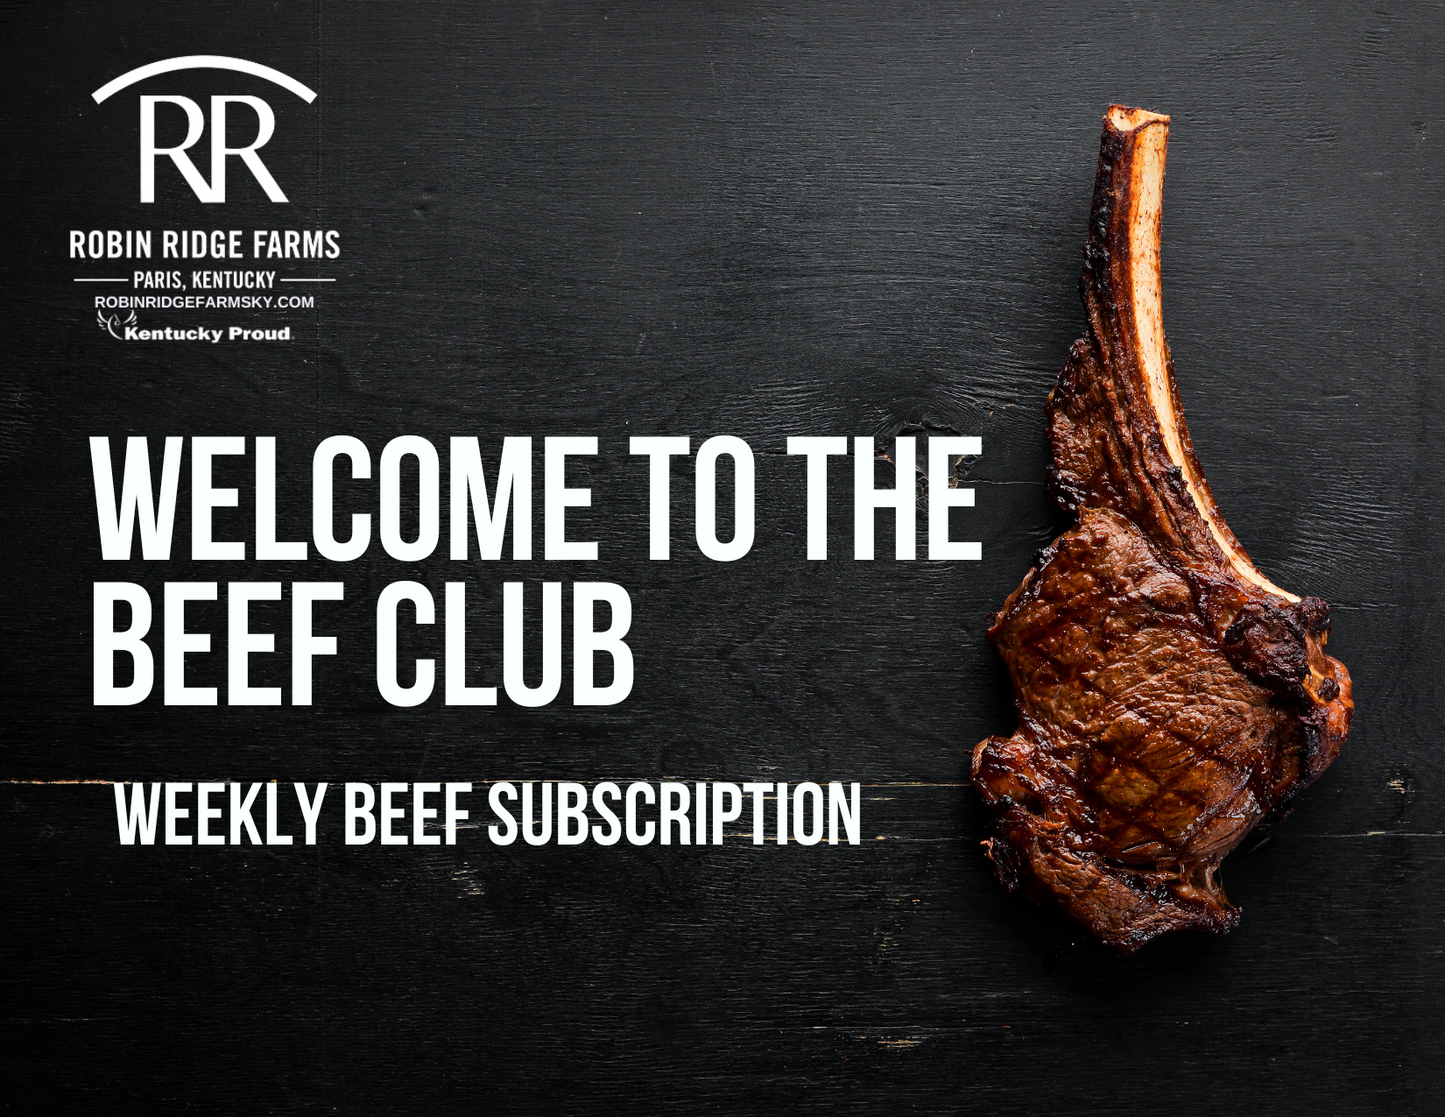 Weekly Beef Club - Winter Subscription